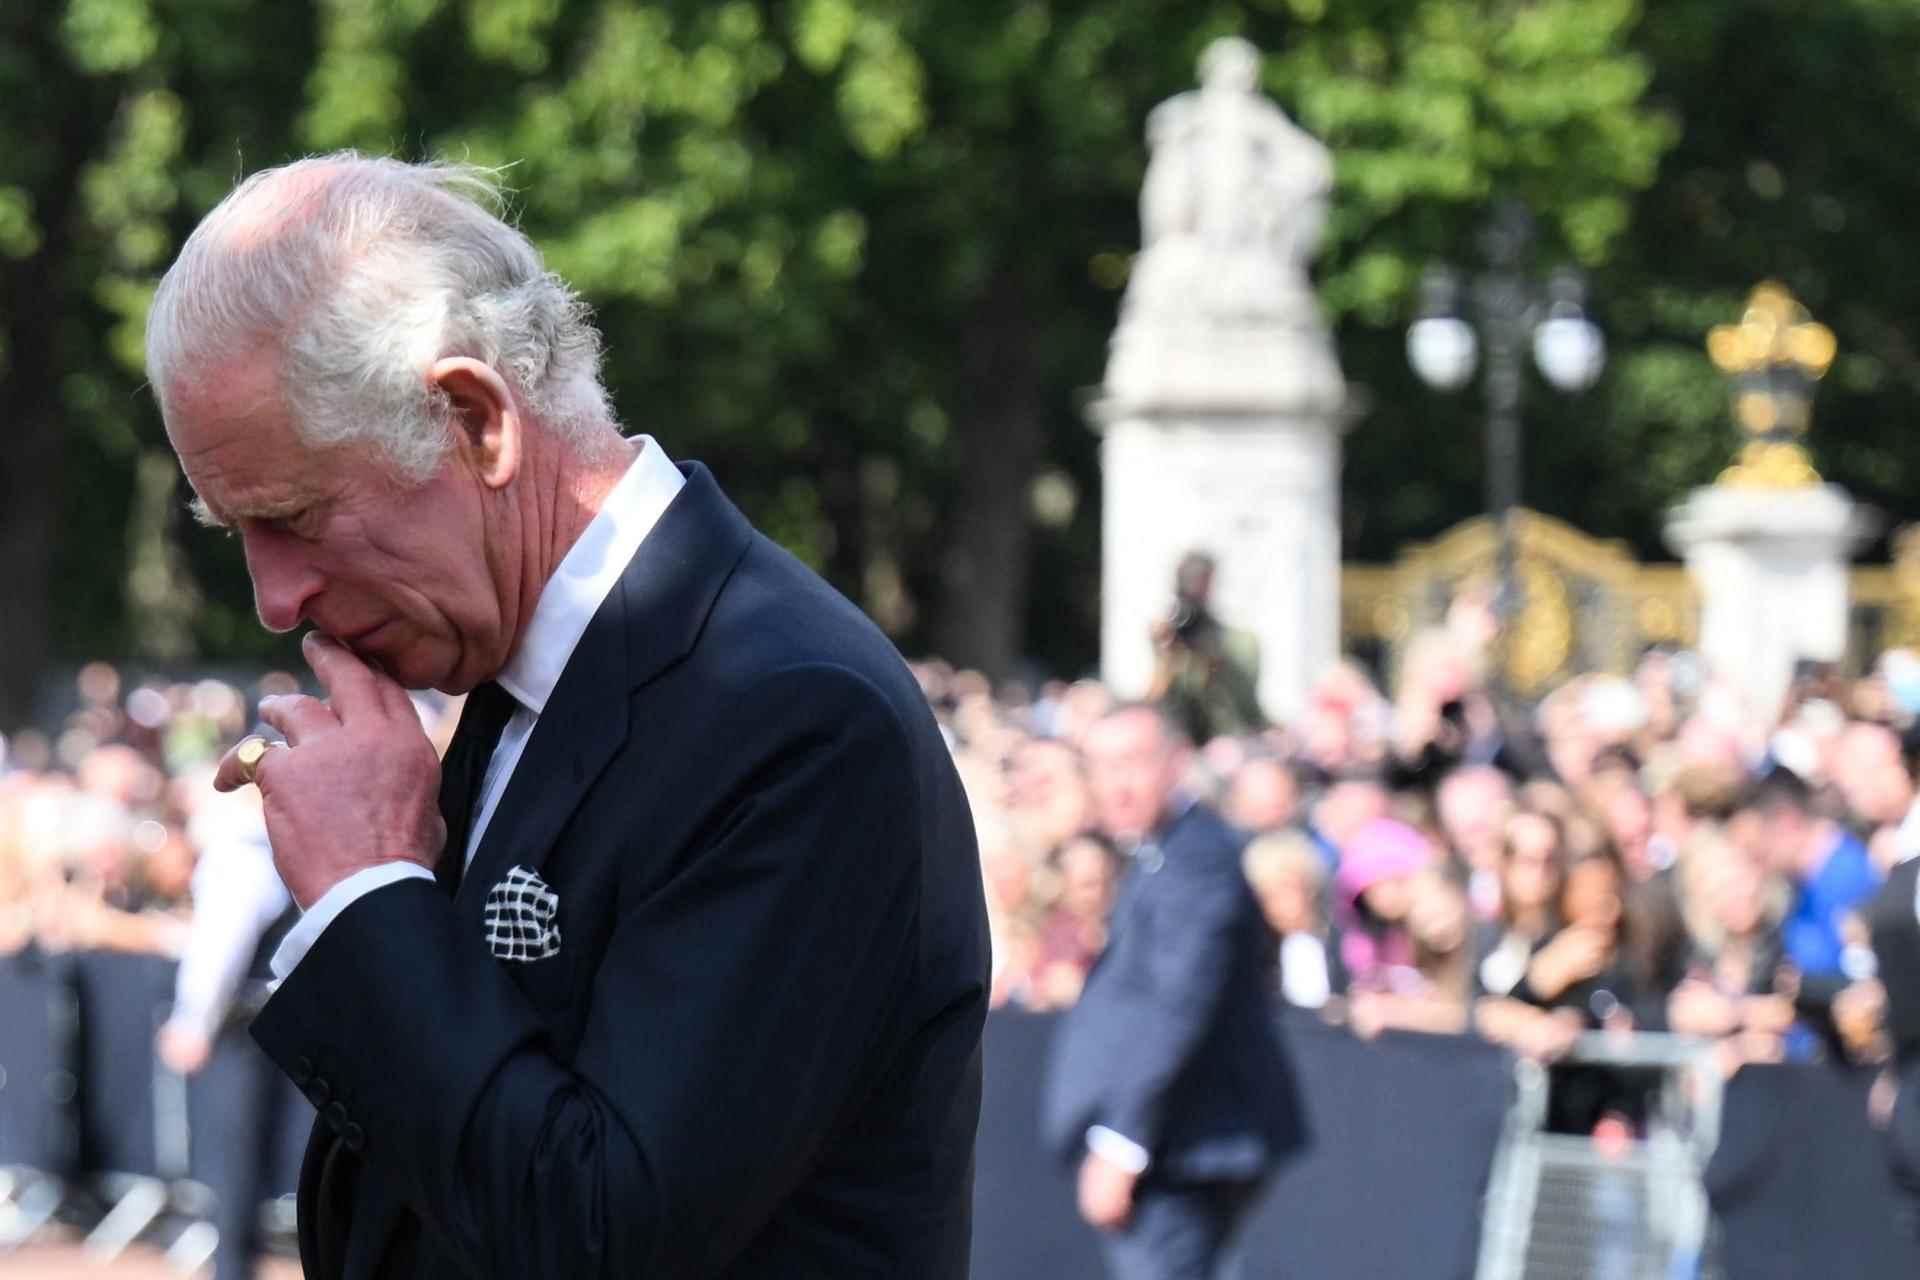 King Charles III in front of the flowers laid in tribute outside Buckingham Palace in London, September 9, 2022.